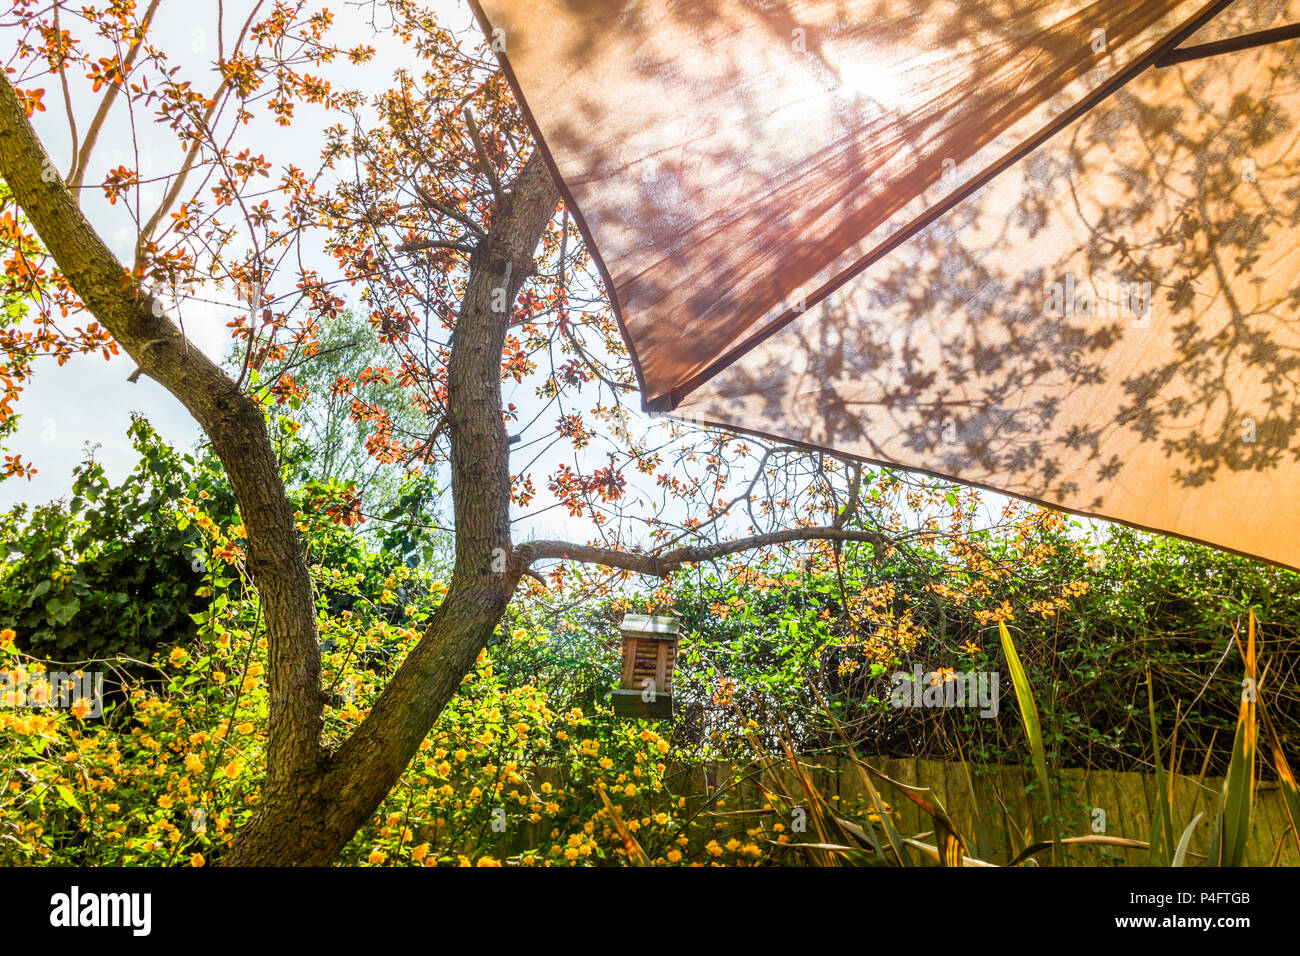 Sun shining through parasol and leaves in an urban garden with yellow jasmine flowers and bird feeder Stock Photo